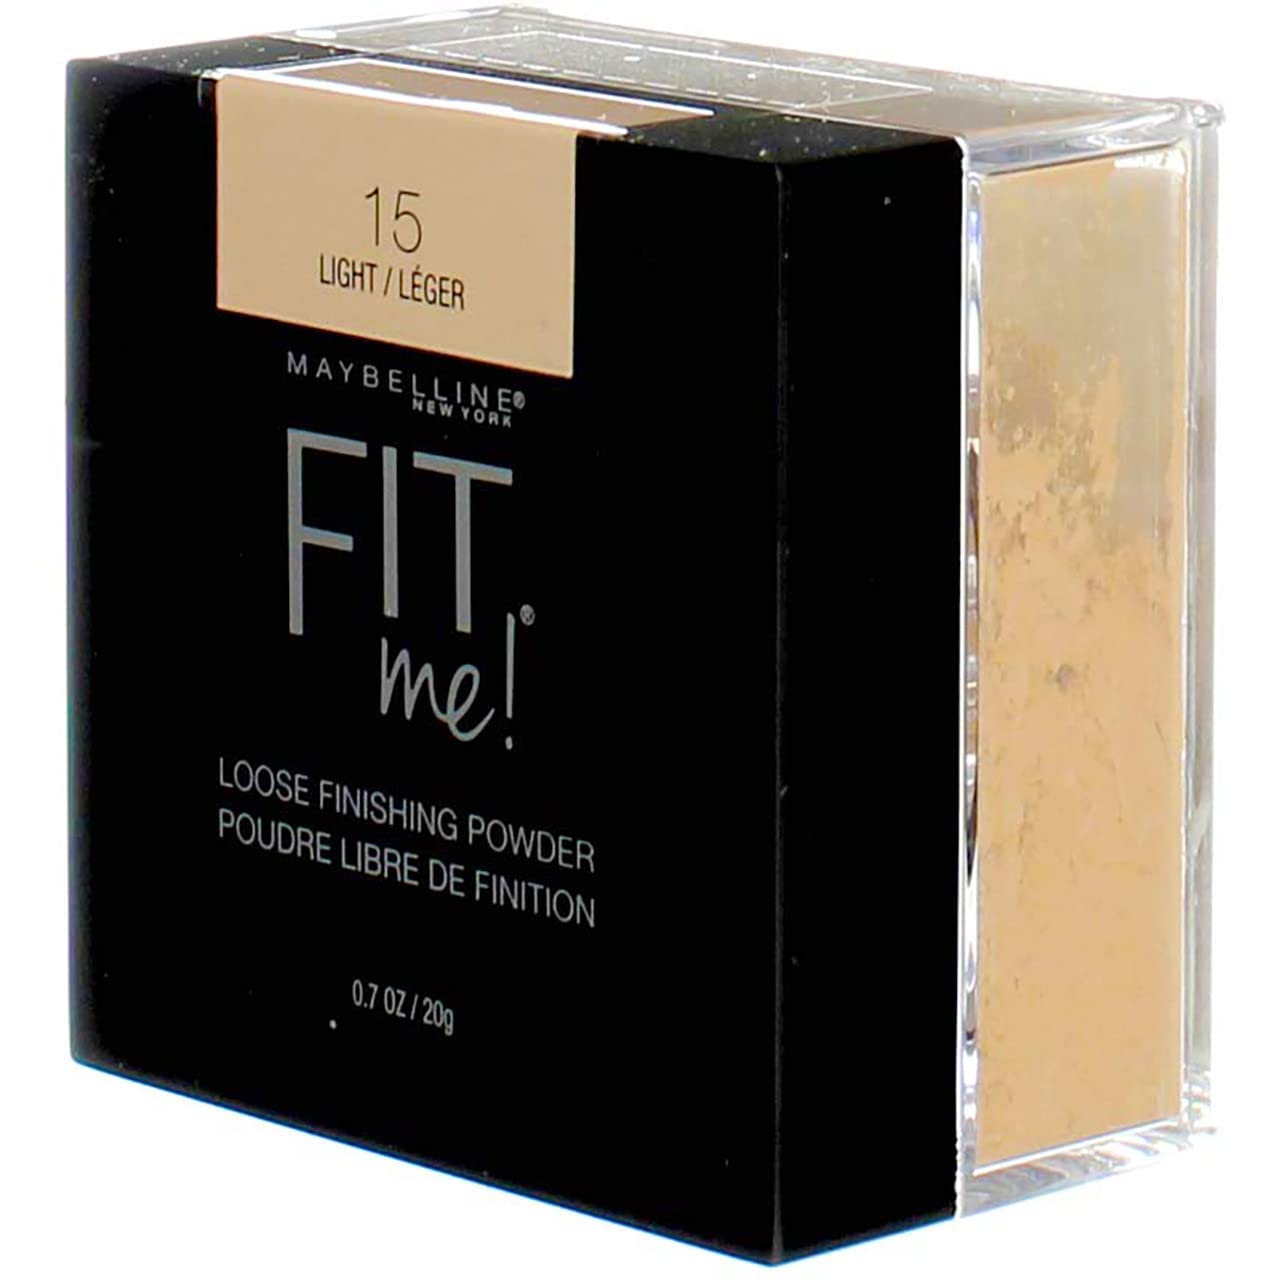 Maybelline New York Maybelline Fit Me Loose Finishing Powder, 15 Light, 0.7 oz (Pack of 2)